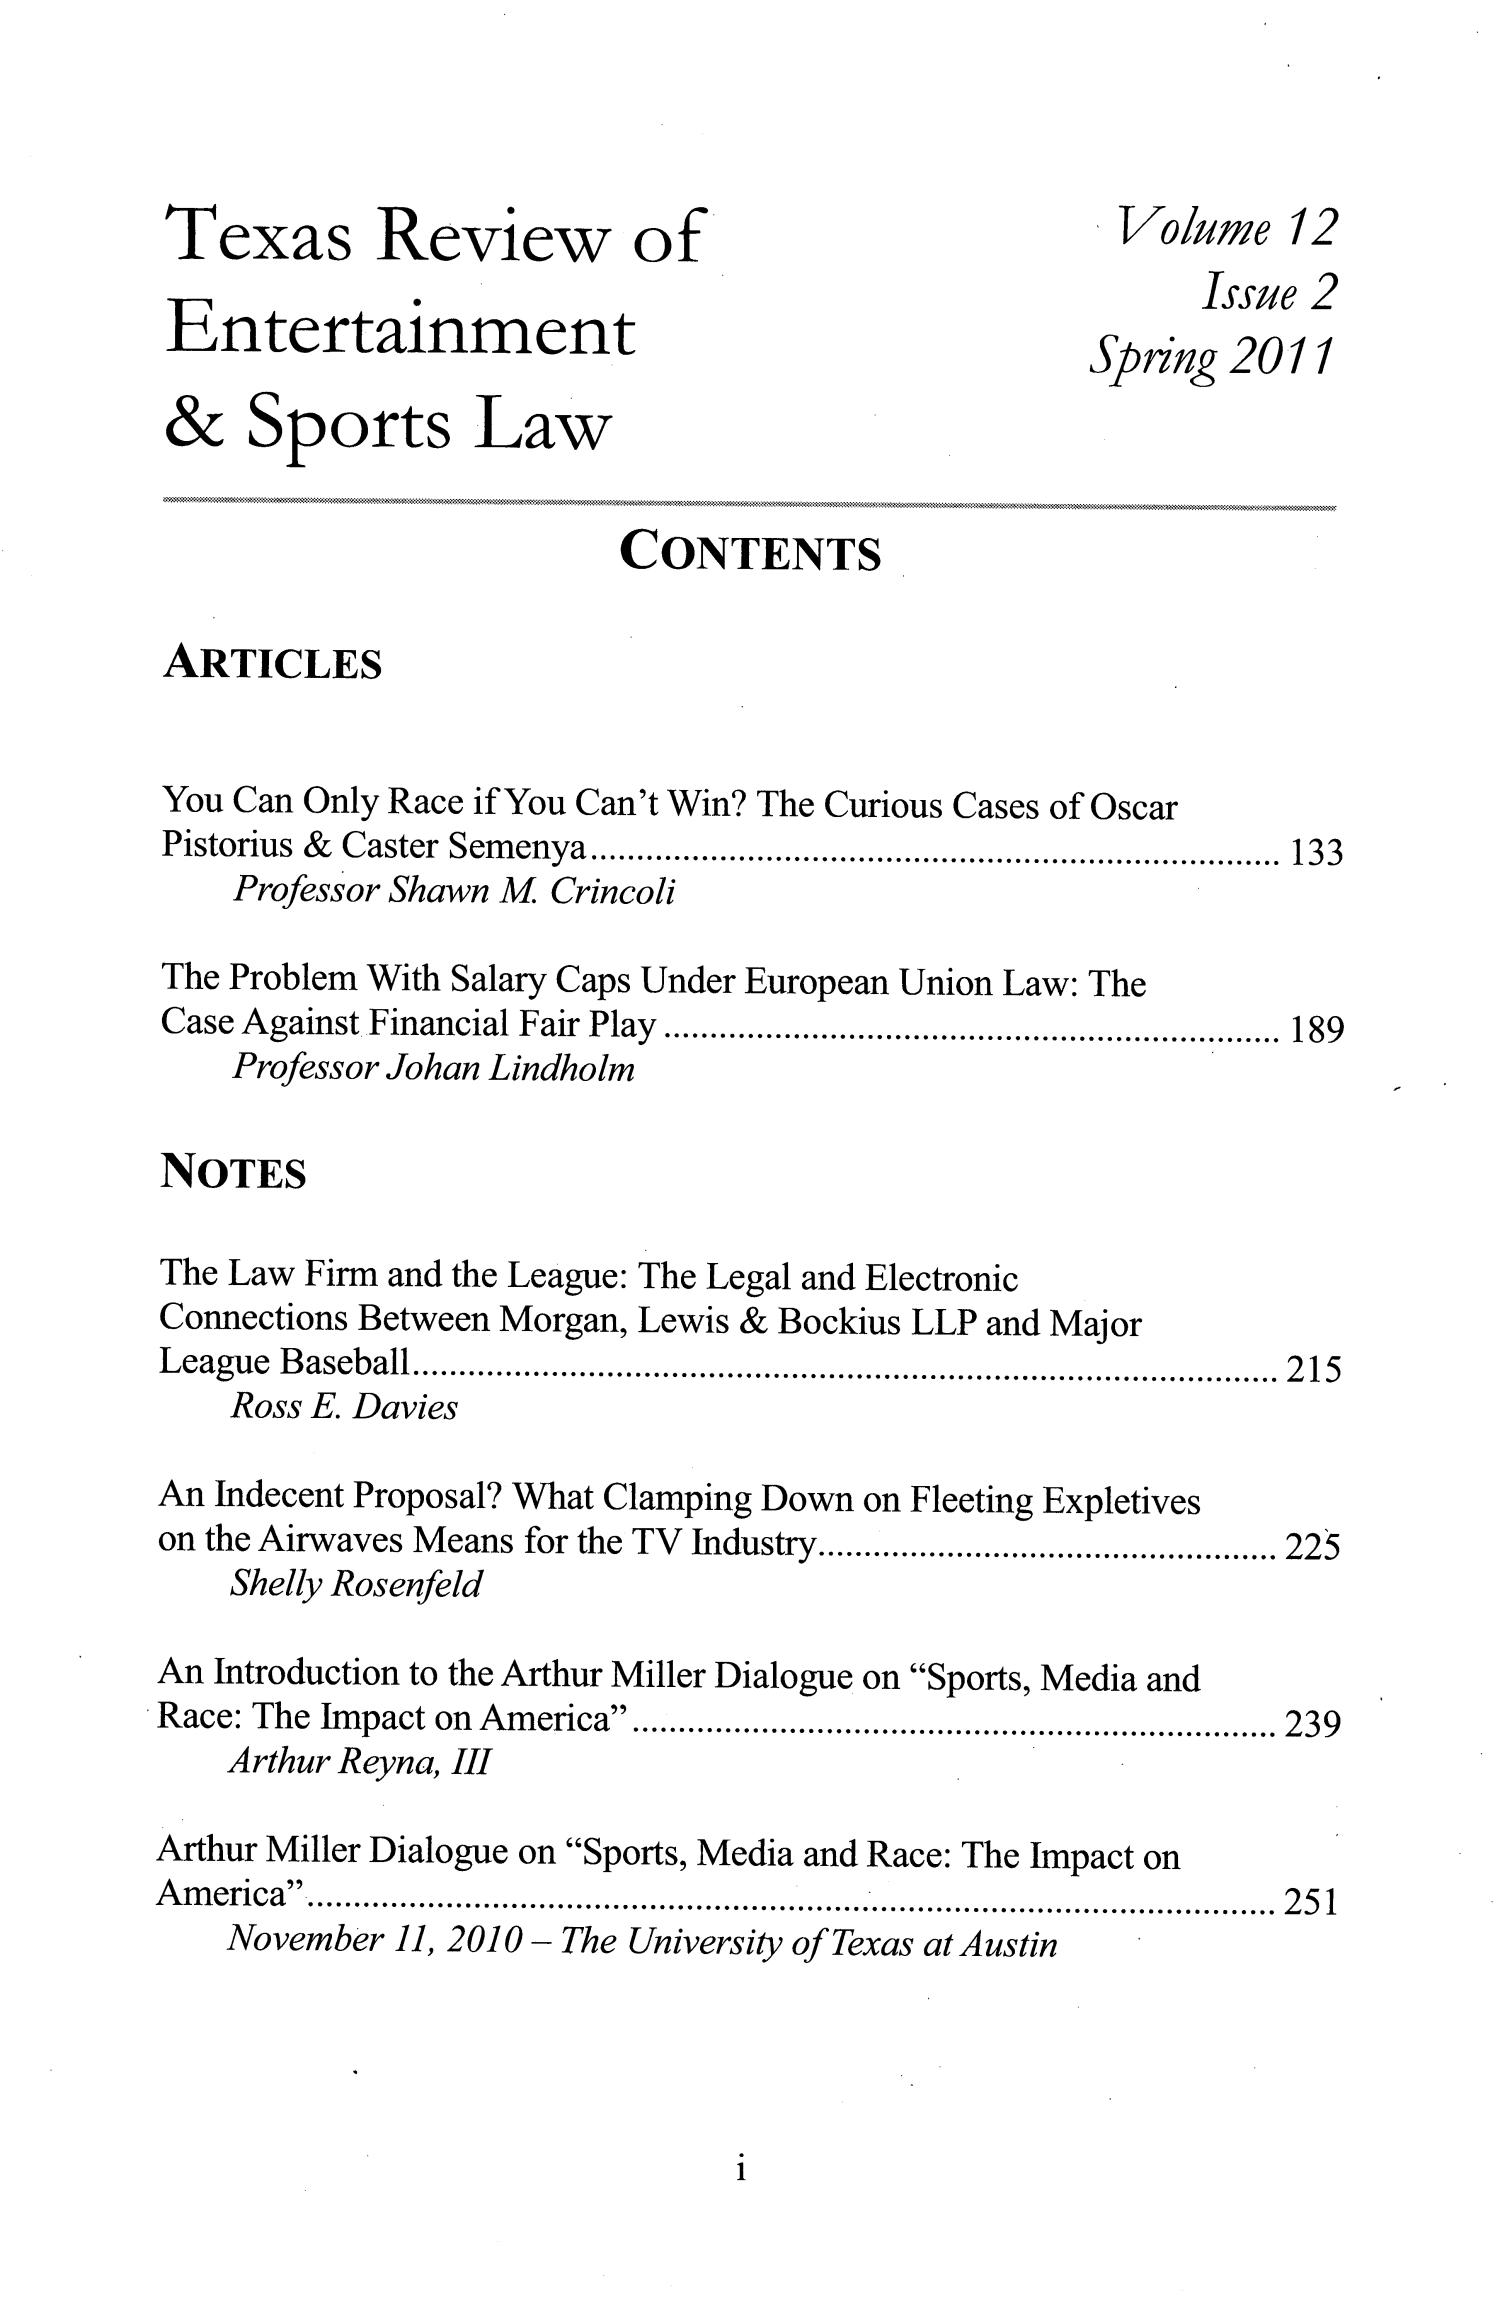 Texas Review of Entertainment & Sports Law, Volume 12, Number 2, Spring 2011
                                                
                                                    I
                                                